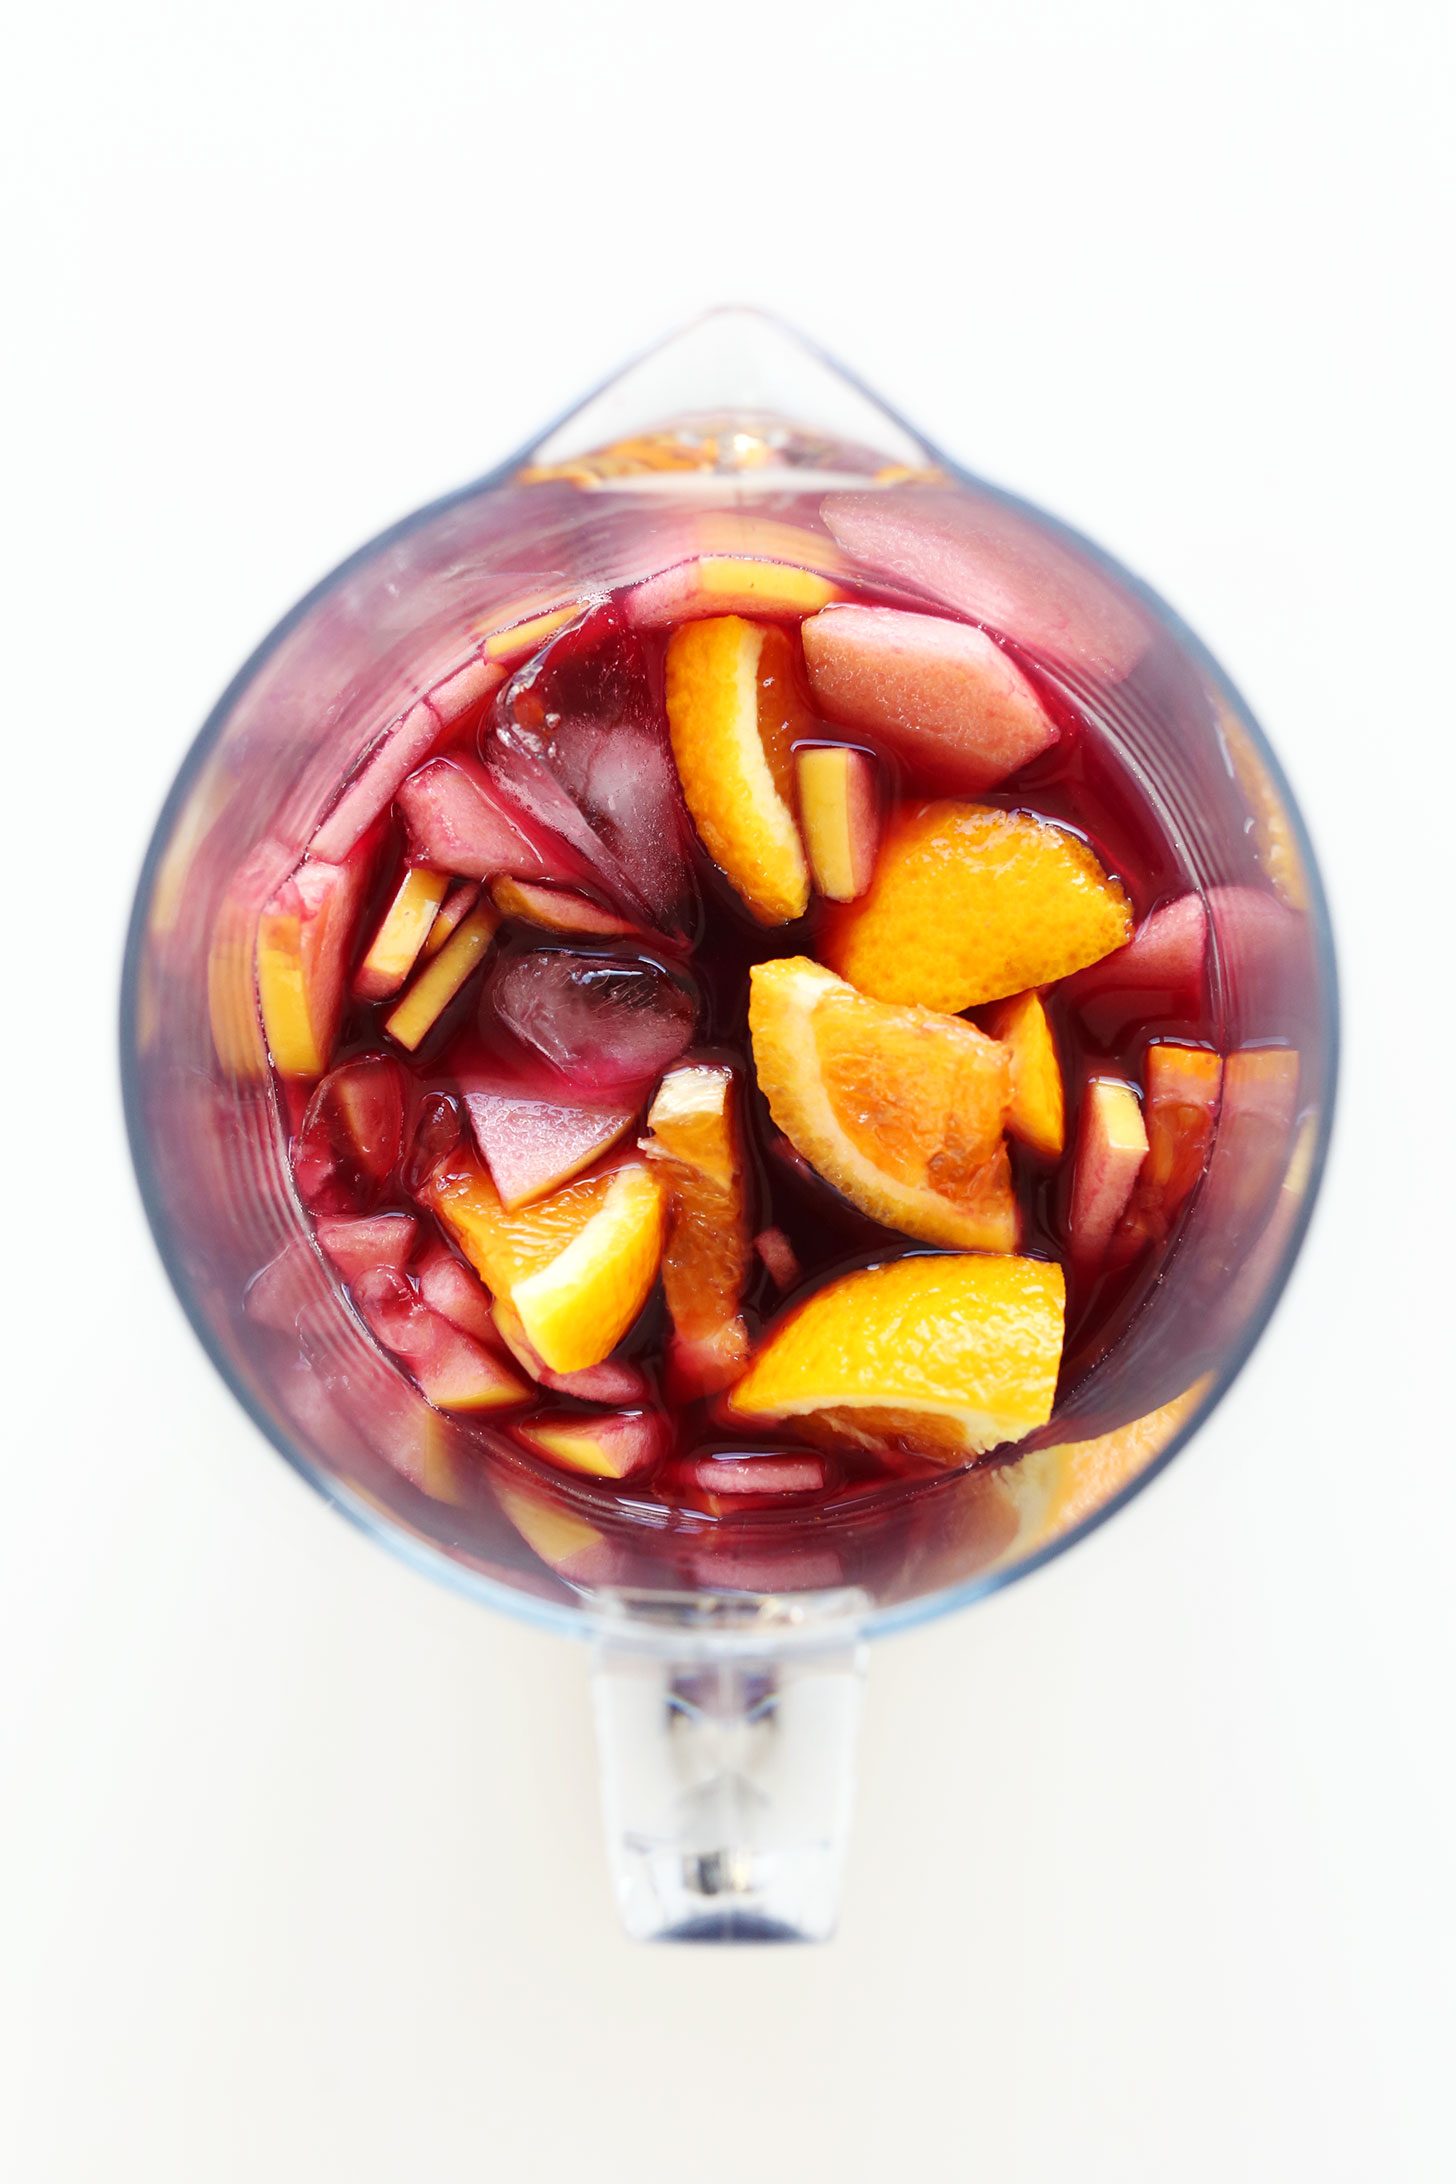 Pitcher filled with our Amazing Traditional Red Sangria recipe